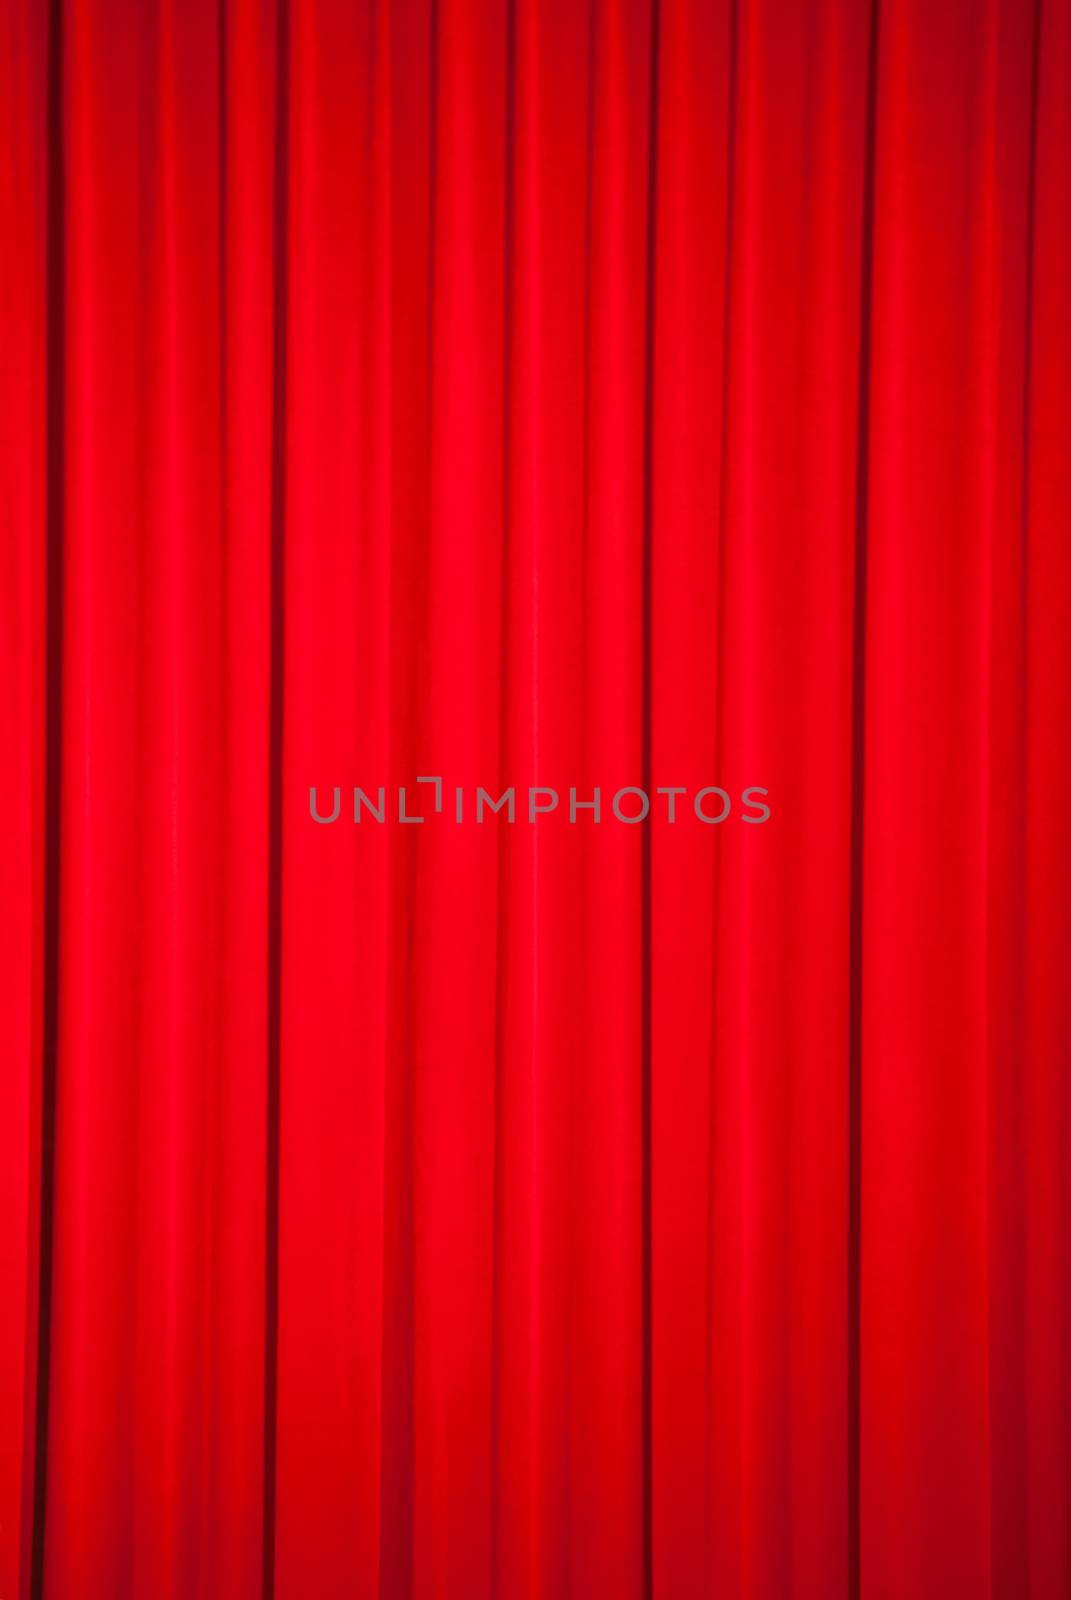 Brightly lit red curtains for background